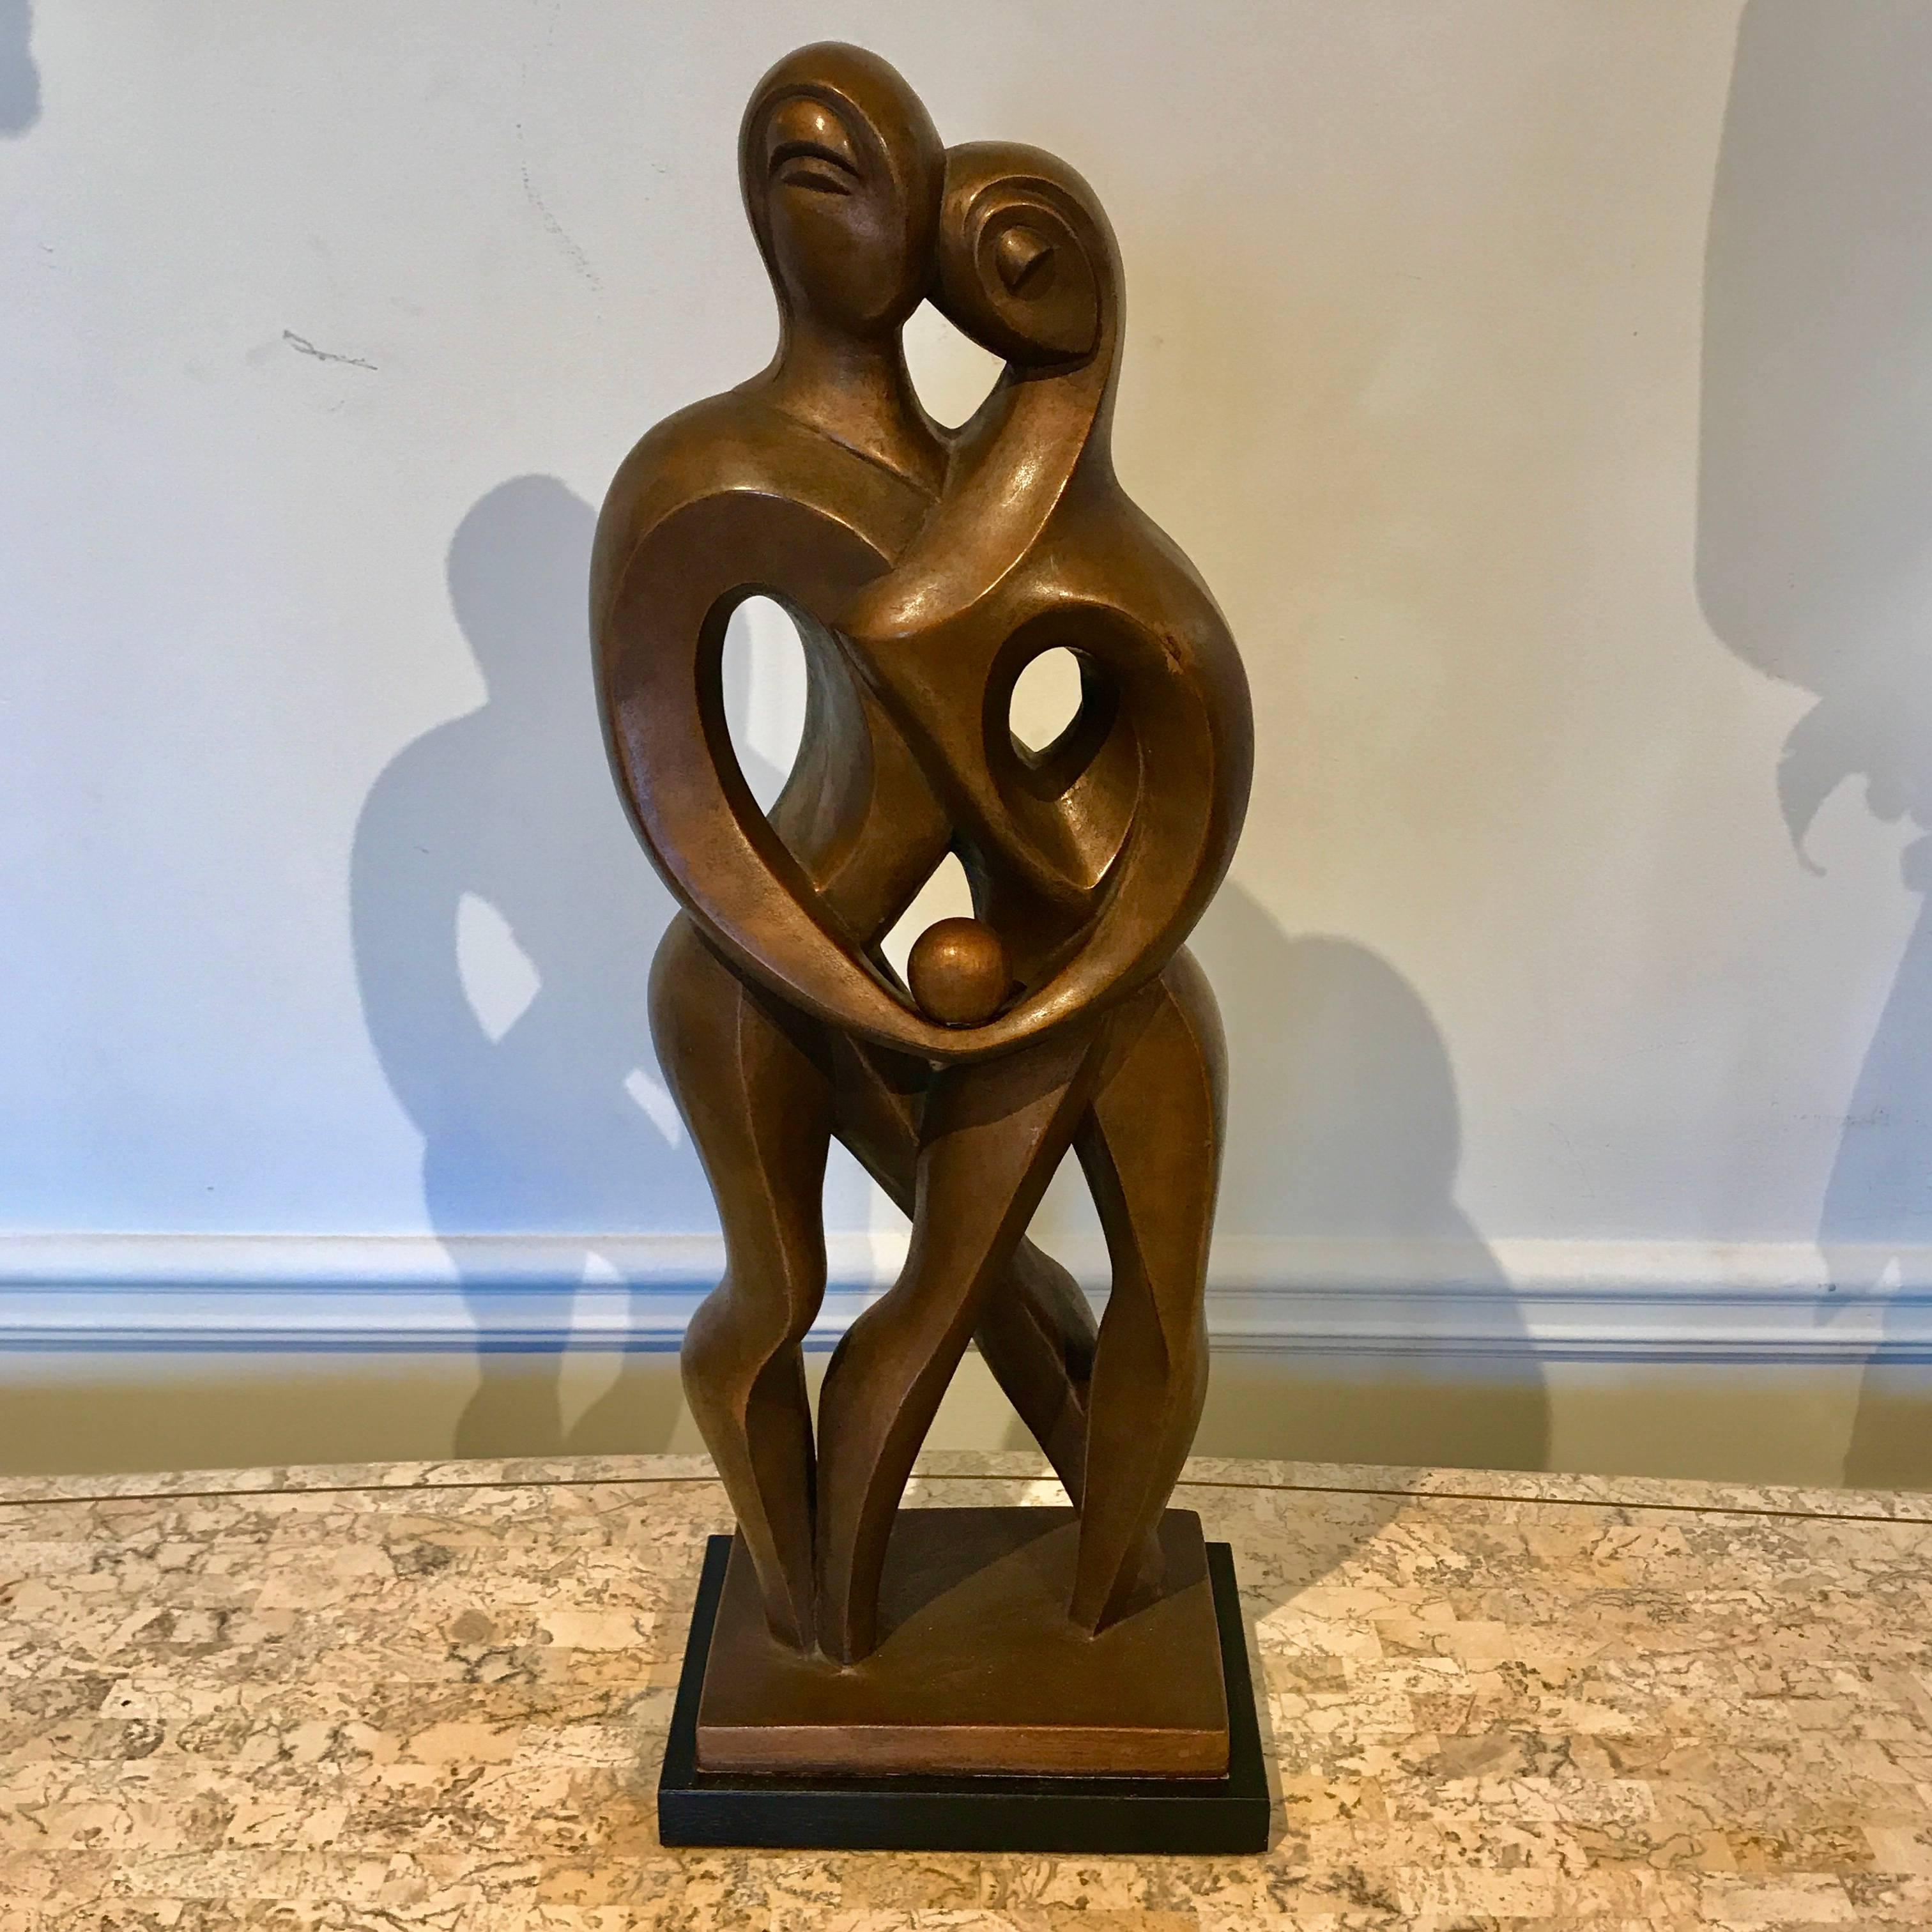 Adam & Eve bronze sculpture signed Zavel Silber
Zavel (Zavel Silber) Zavel is active/lives in New York / Latvia. Sculptor and painter
Midcentury abstract bronze-clad sculpture
Beautifully cast and modeled thick bronze over plaster